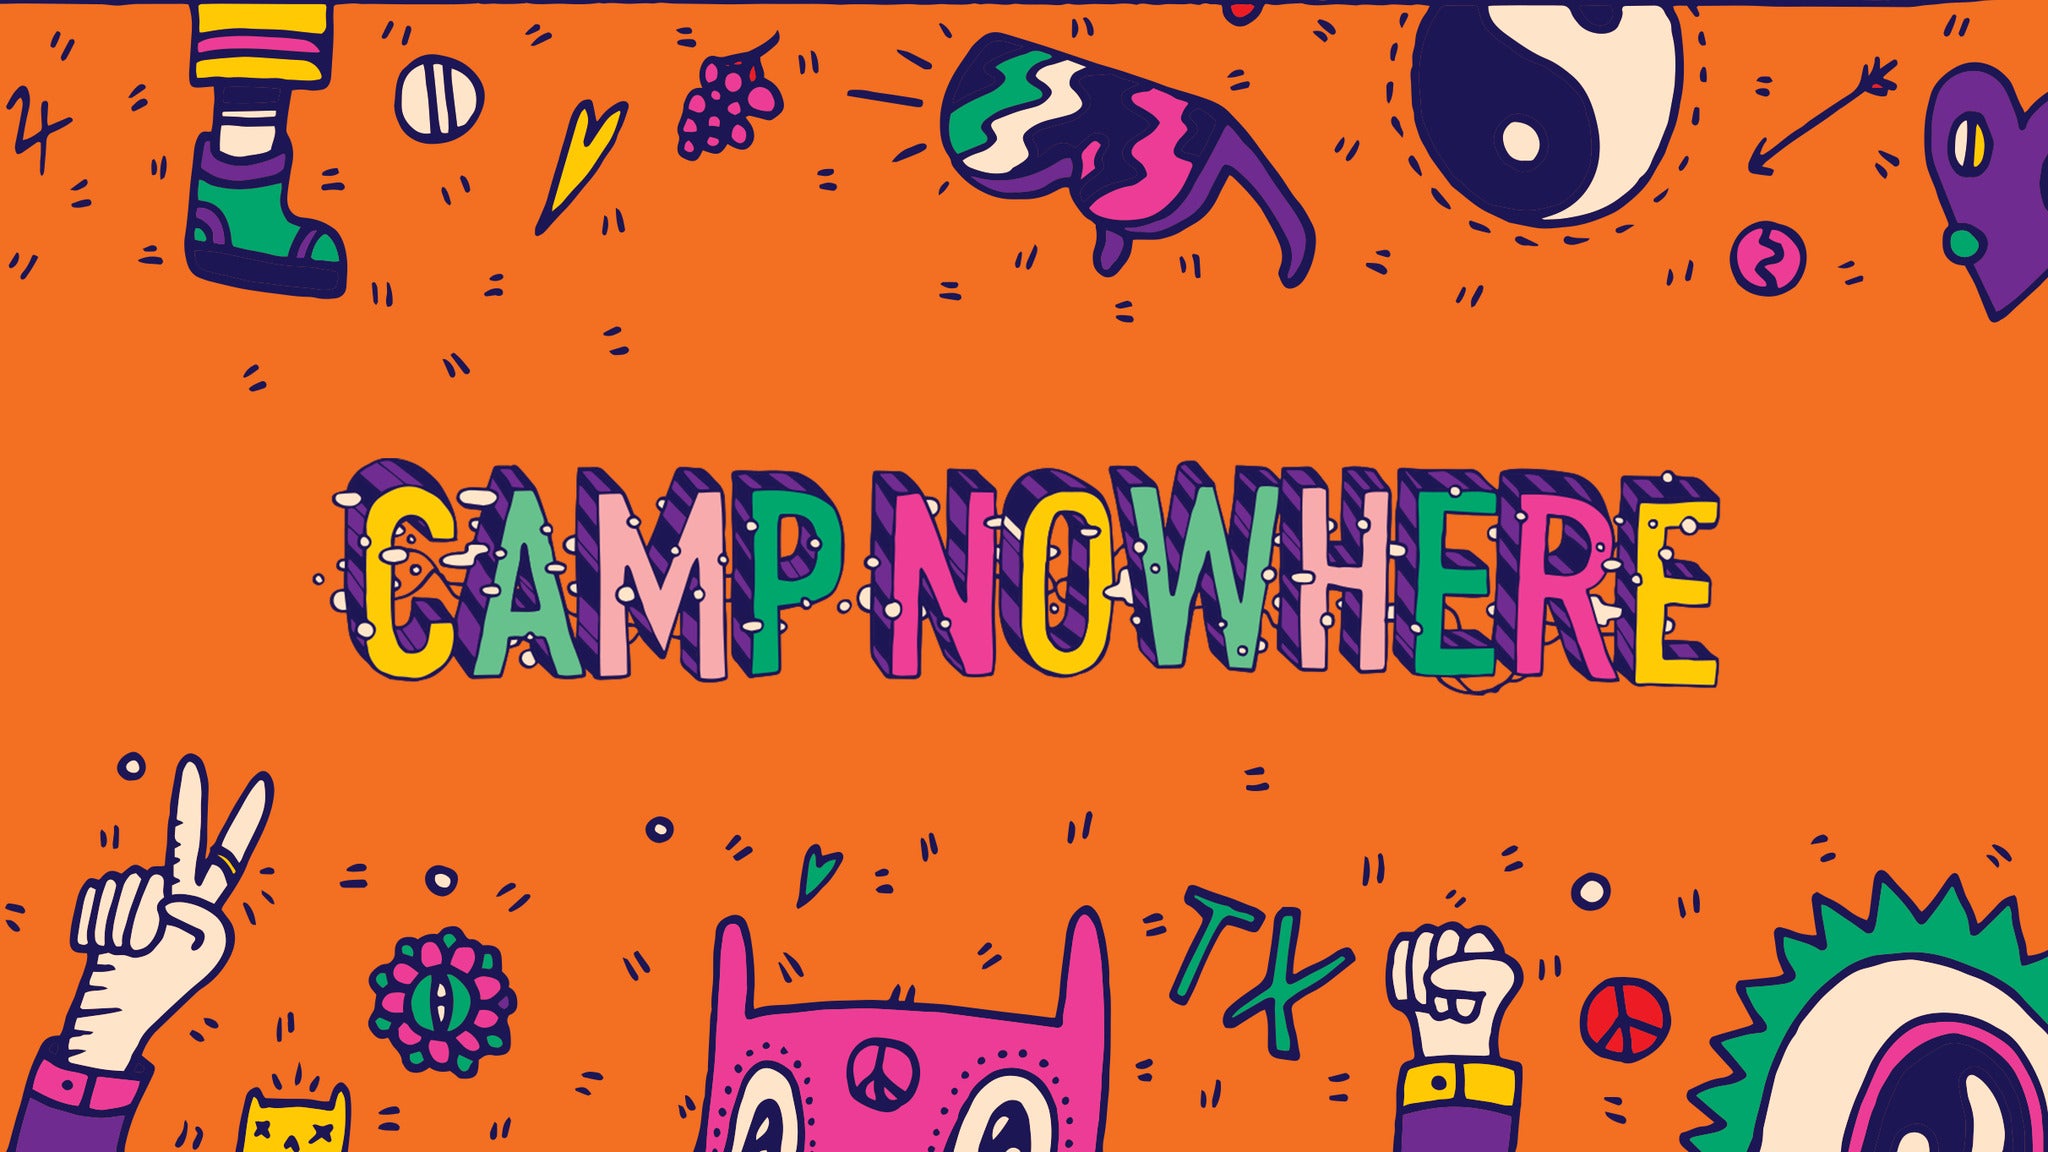 Camp Nowhere in Austin promo photo for C3 Concerts / Venue presale offer code